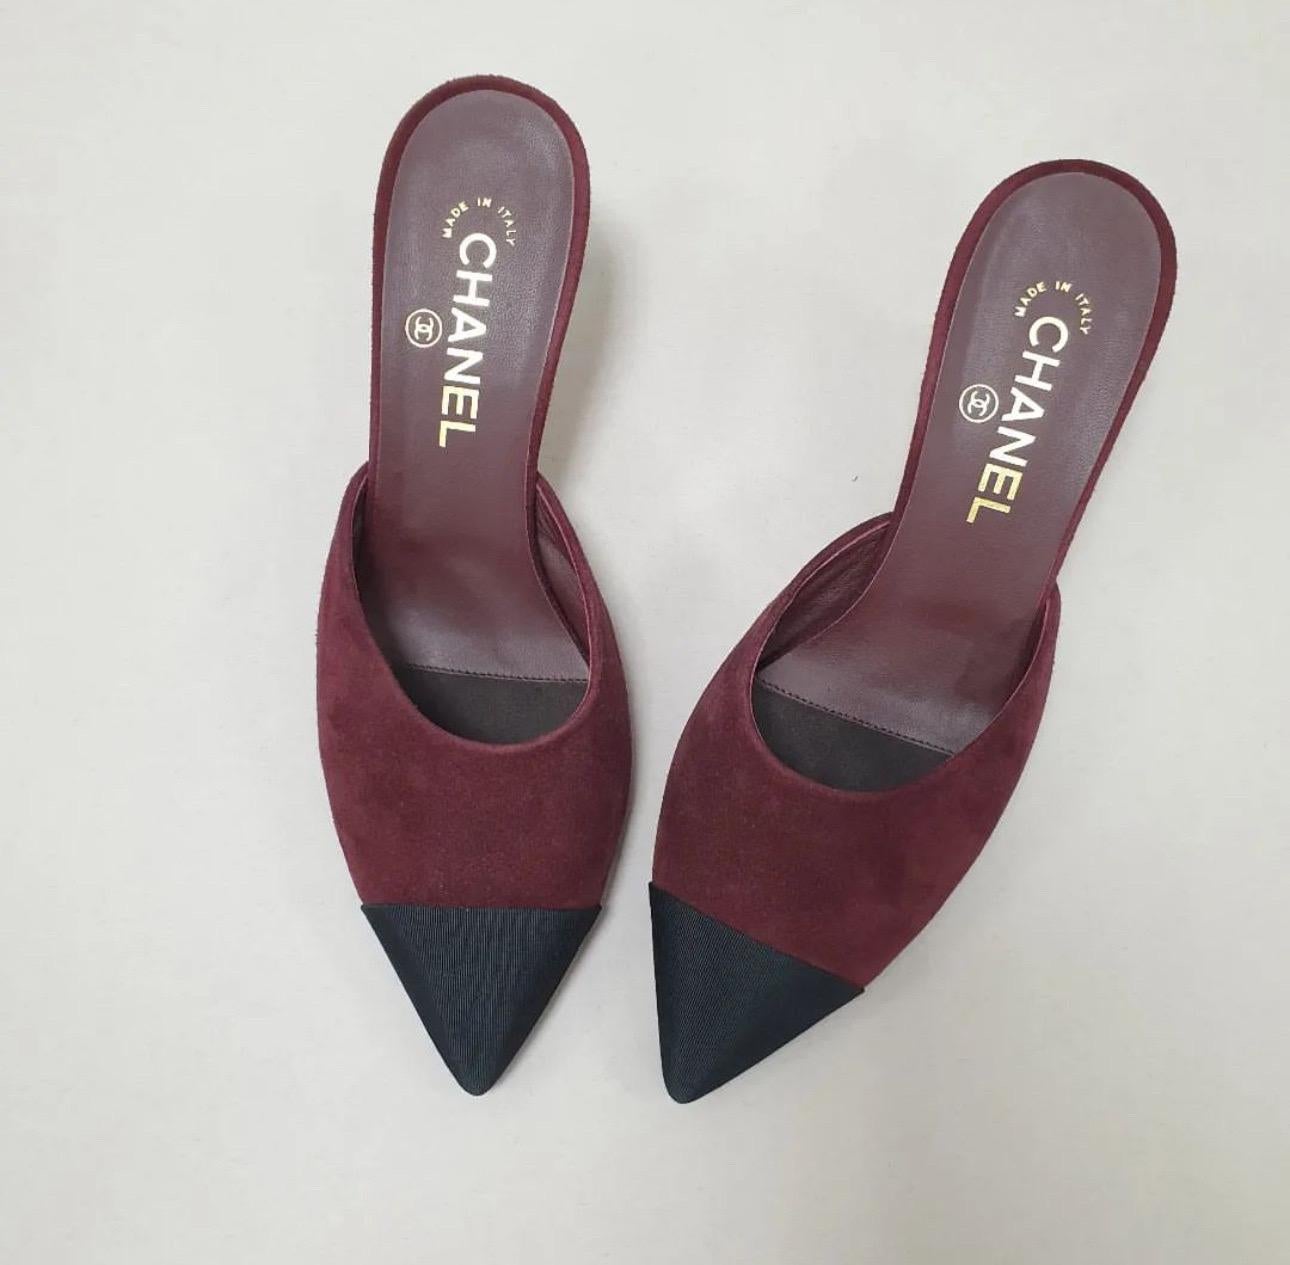 100% authentic Chanel pointed-toe kitten-heel mules in burbundy suede featuring a classic black grosgrain tip. Have been worn once inside and are in virtually new condition. 
No box. No dust bag.

Measurements
Imprinted Size 39C
Shoe Size 39
Inside